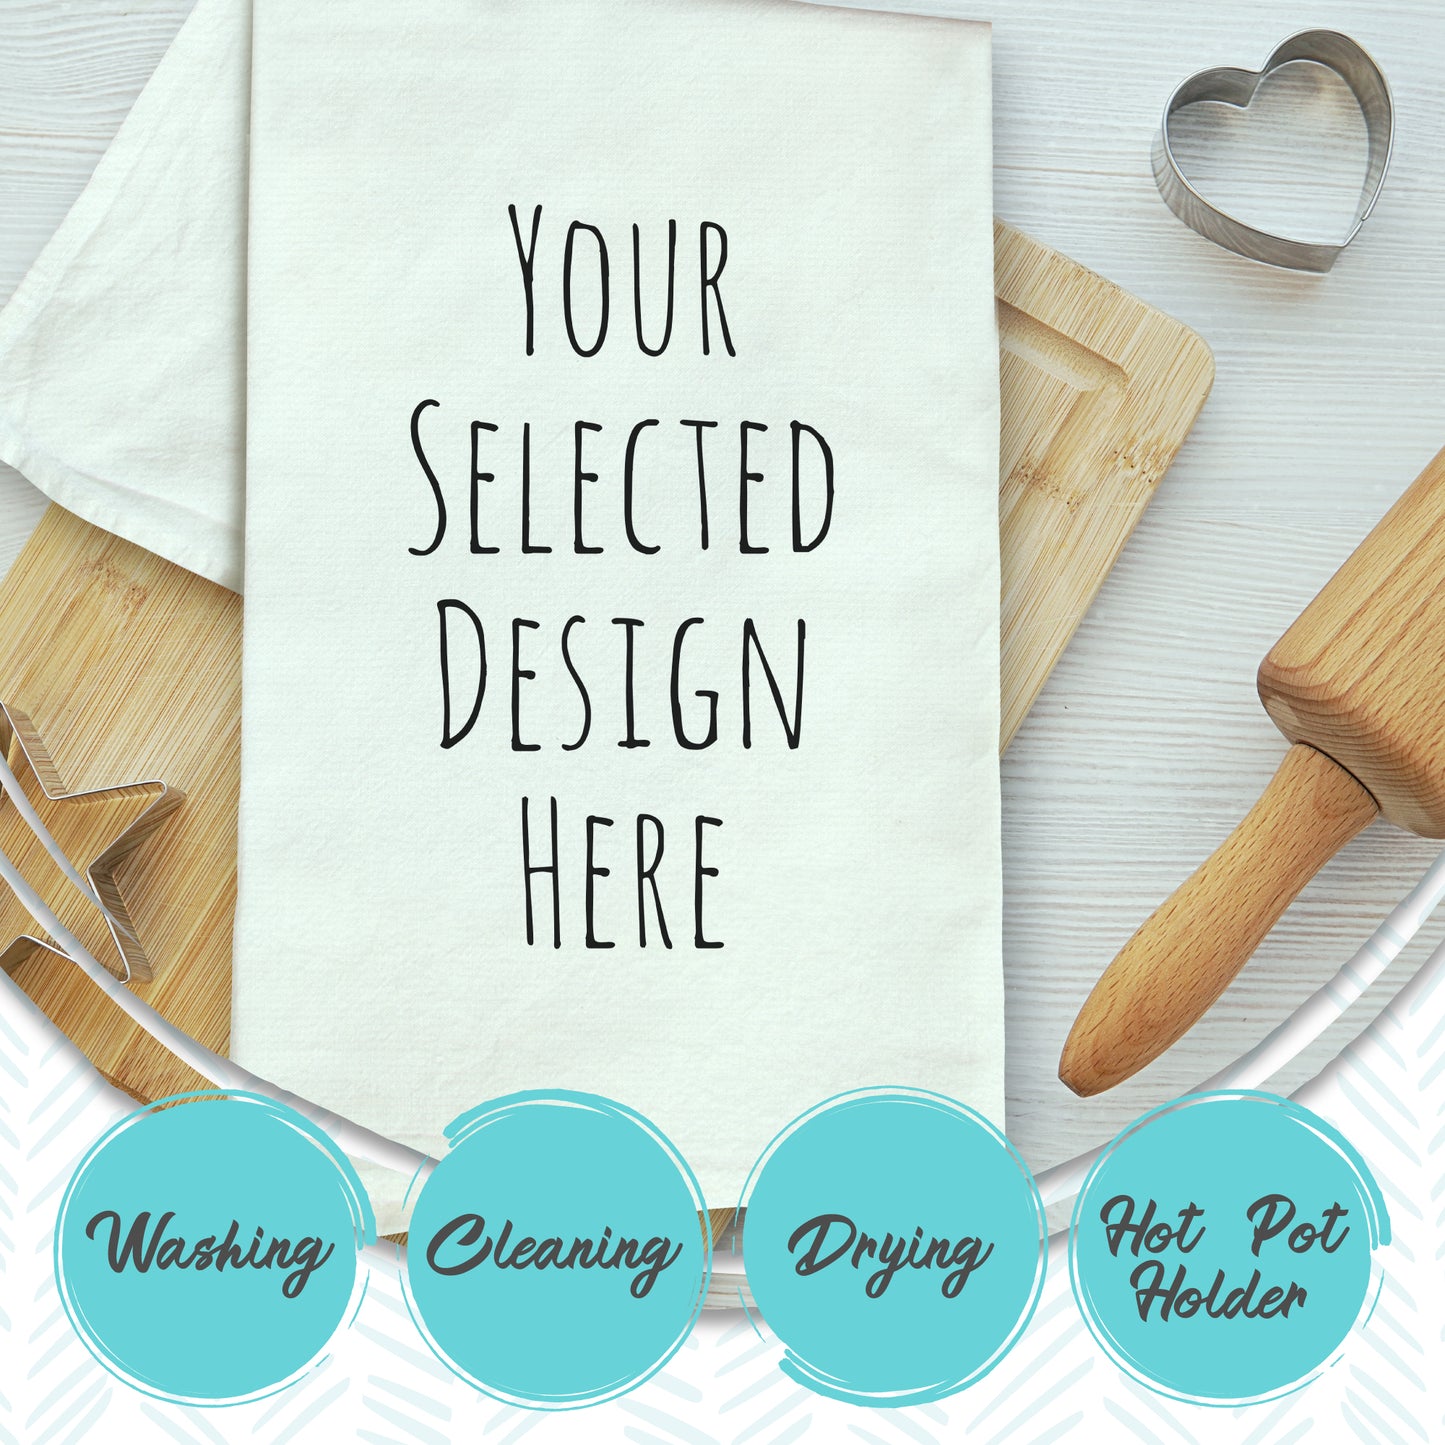 One Spicy Meatball Dish Towel - White Or Gray - MoonlightMakers